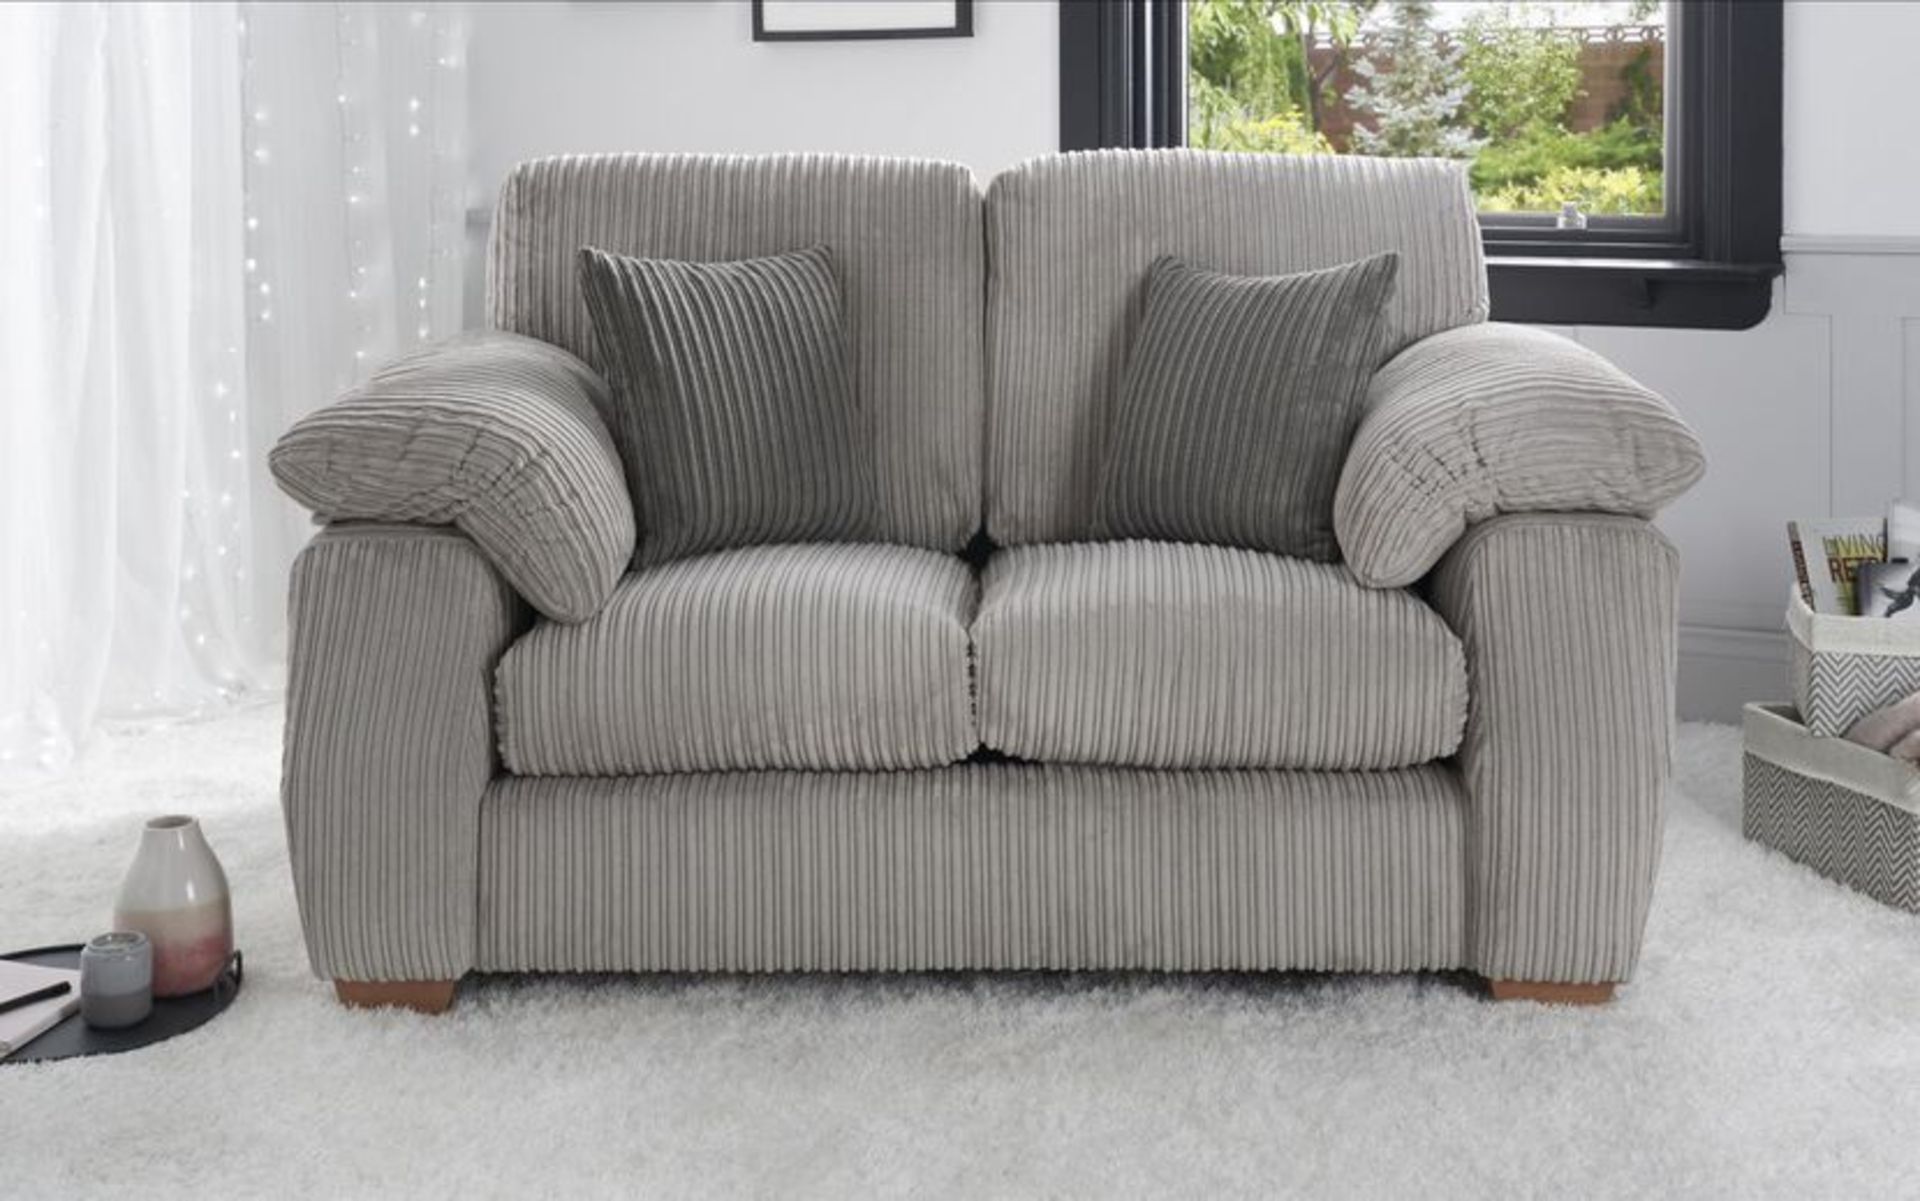 Everett 2 Seater Sofa Standard Back Jumbo Cord Charcoal Silver Light Wood Foam Acl02 RRP 979 About - Image 2 of 2